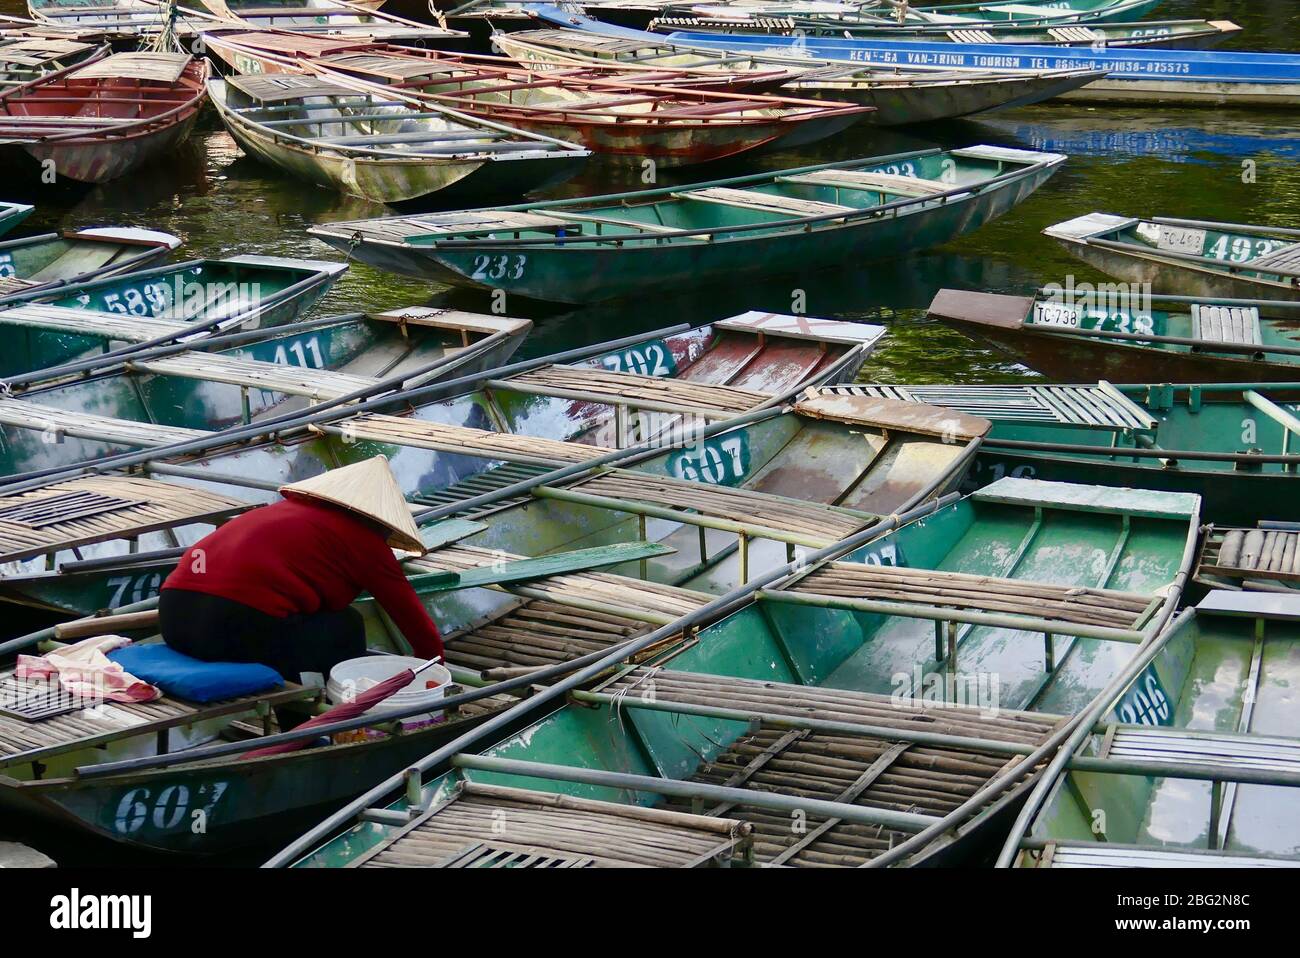 Sightseeing boats docked on the Tam Coc River in Ninh Binh, Vietnam Stock Photo